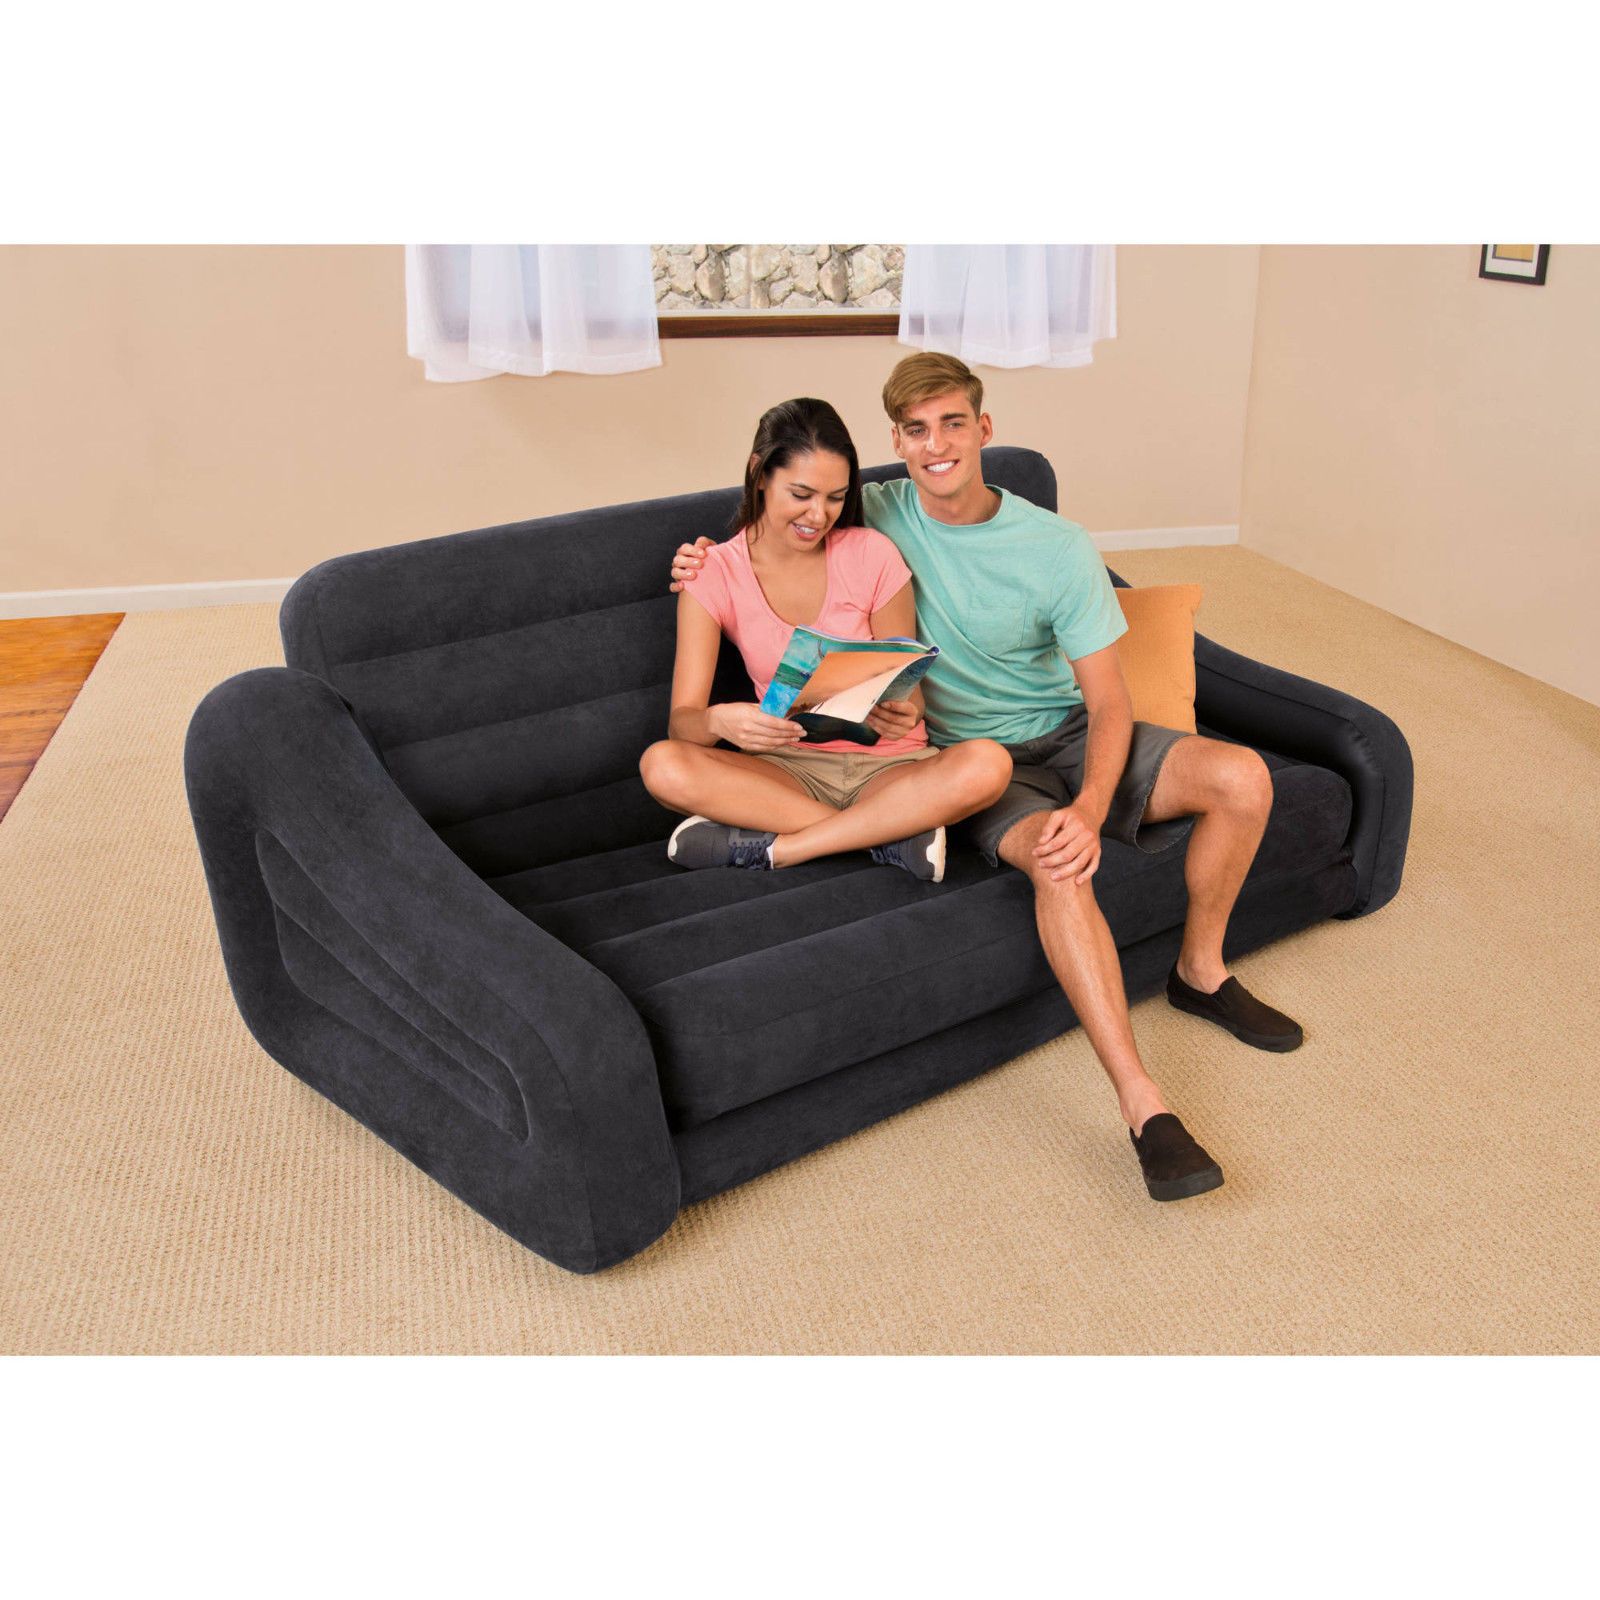 2020 Couch Bed Sofa Sectional Sleeper Futon Living Room Furniture NEW From Huangxinxin16